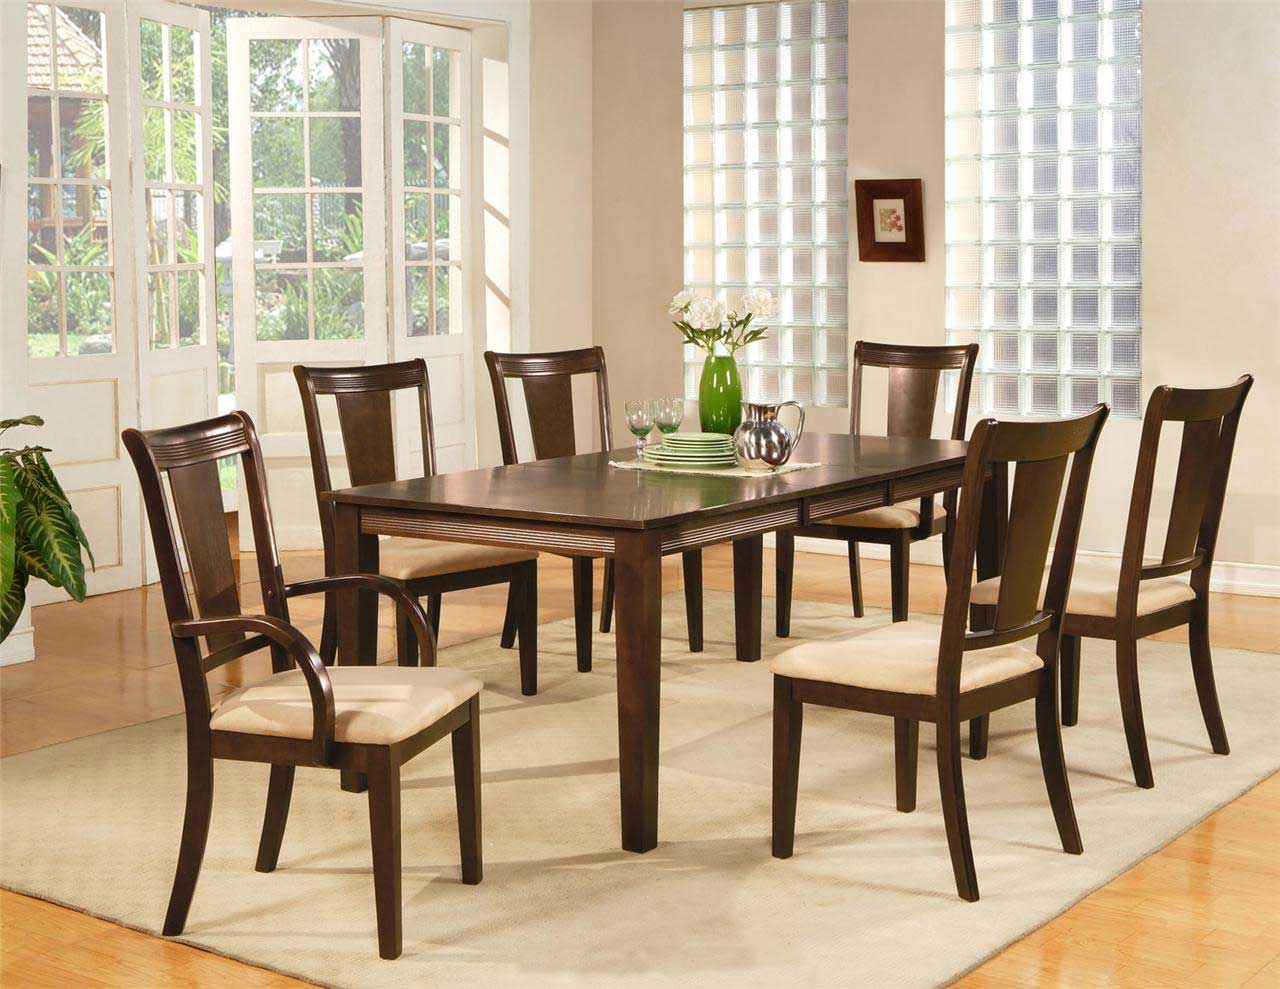 Simple Dining Room Table Decorating Ideas